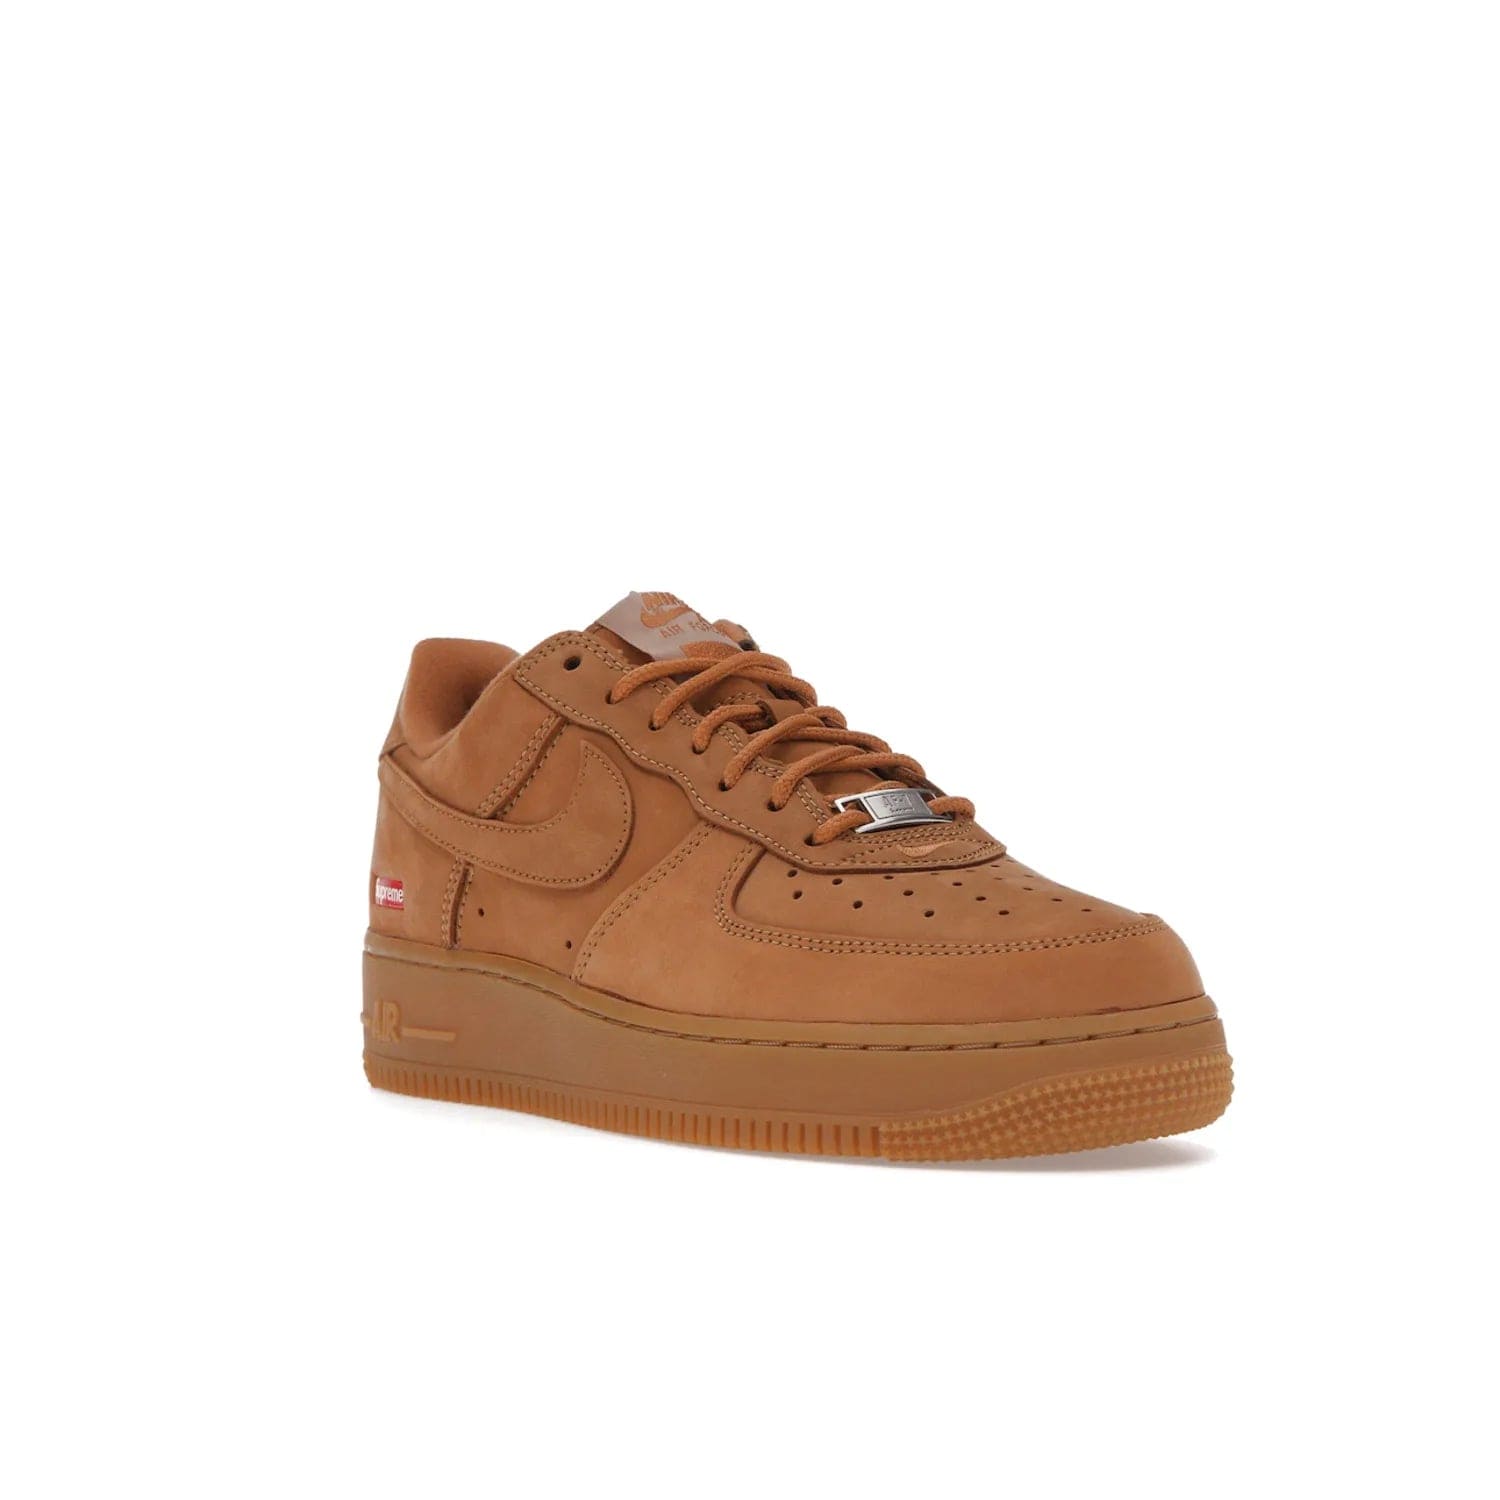 Nike Air Force 1 Low SP Supreme Wheat - Image 6 - Only at www.BallersClubKickz.com - A luxe Flax Durabuck upper and Supreme Box Logo insignias on the lateral heels make the Nike Air Force 1 Low SP Supreme Wheat a stylish lifestyle shoe. Matching Flax Air sole adds a classic touch to this collaboration between Nike and Supreme. Make a statement with this edition of the classic Air Force 1 Low.